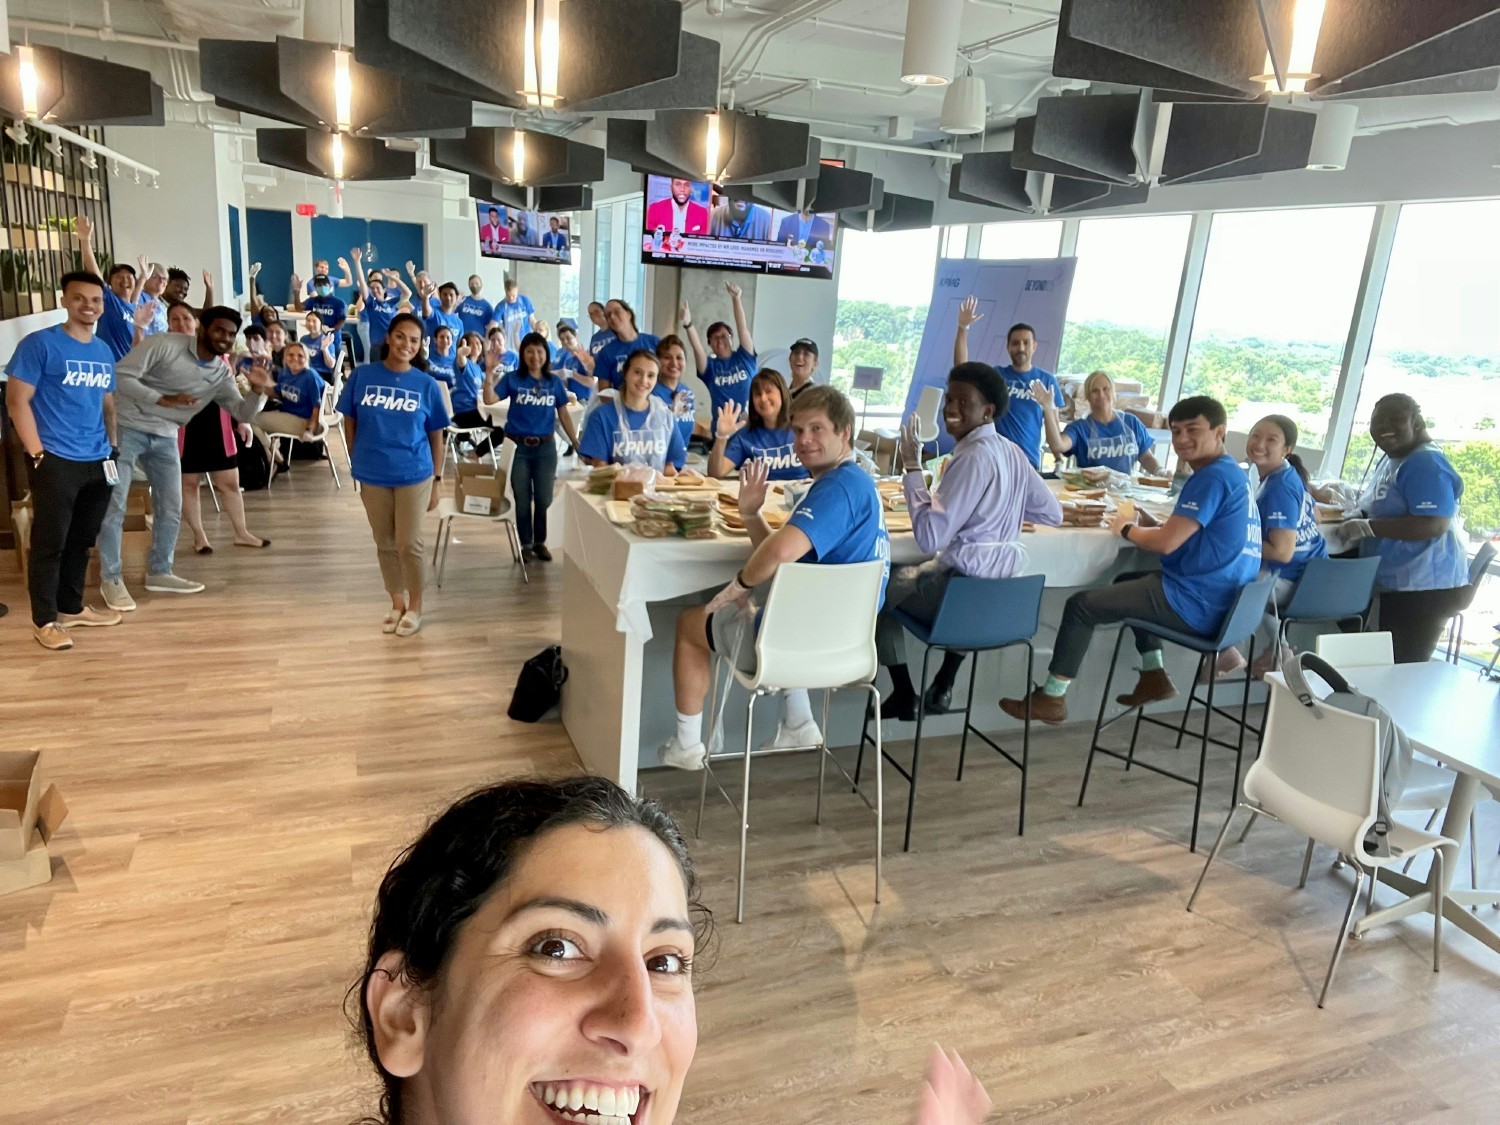 KPMG volunteers in Washington DC make sandwiches to support neighbors in need during KPMG's Community Impact Day.